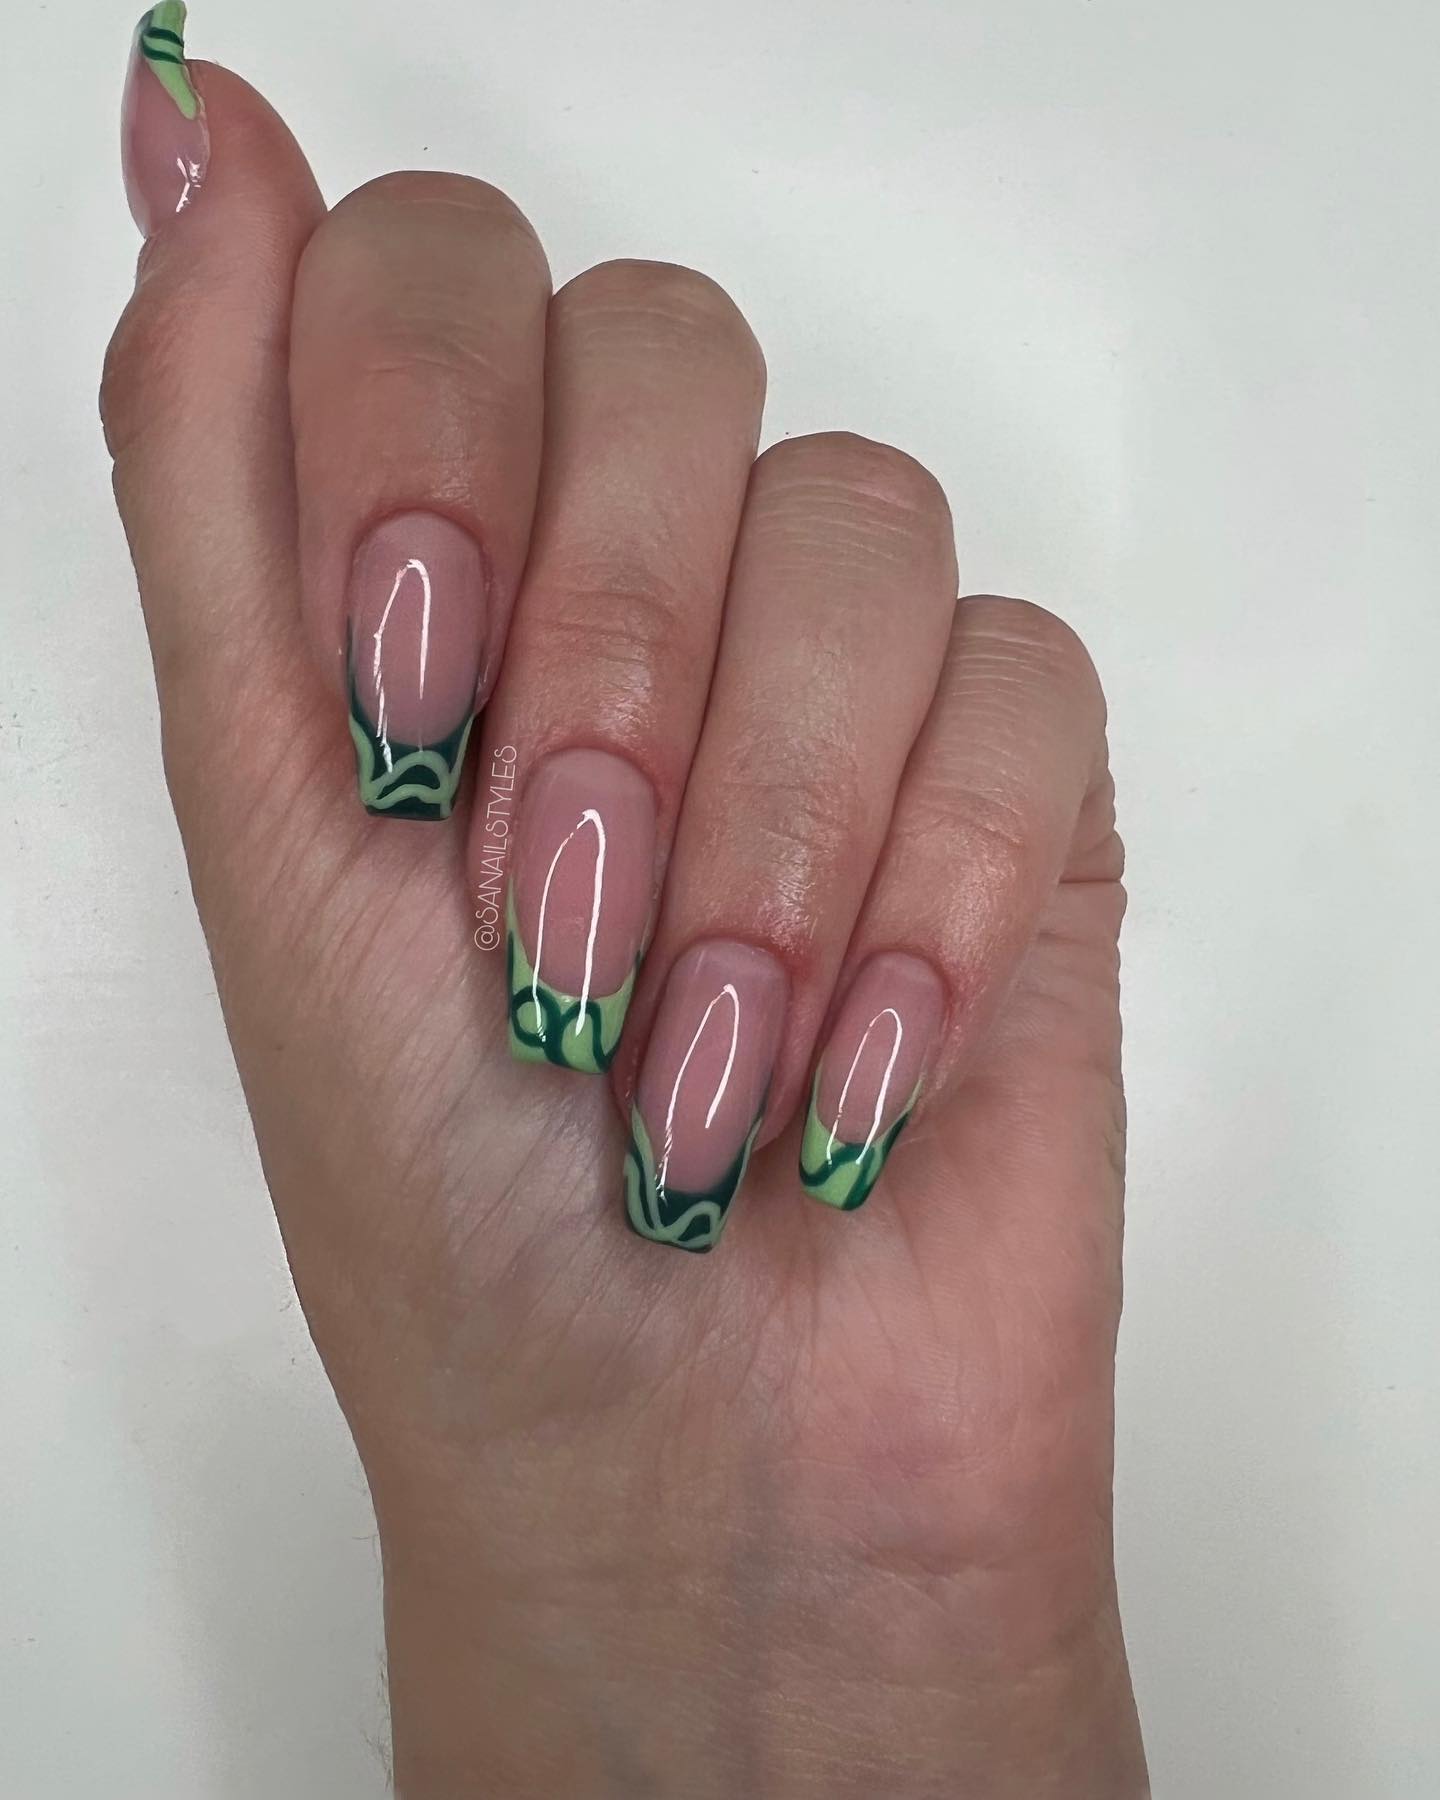 Here is another idea for green french manicure. The beauty of mixing dark and light green colors is just amazing.